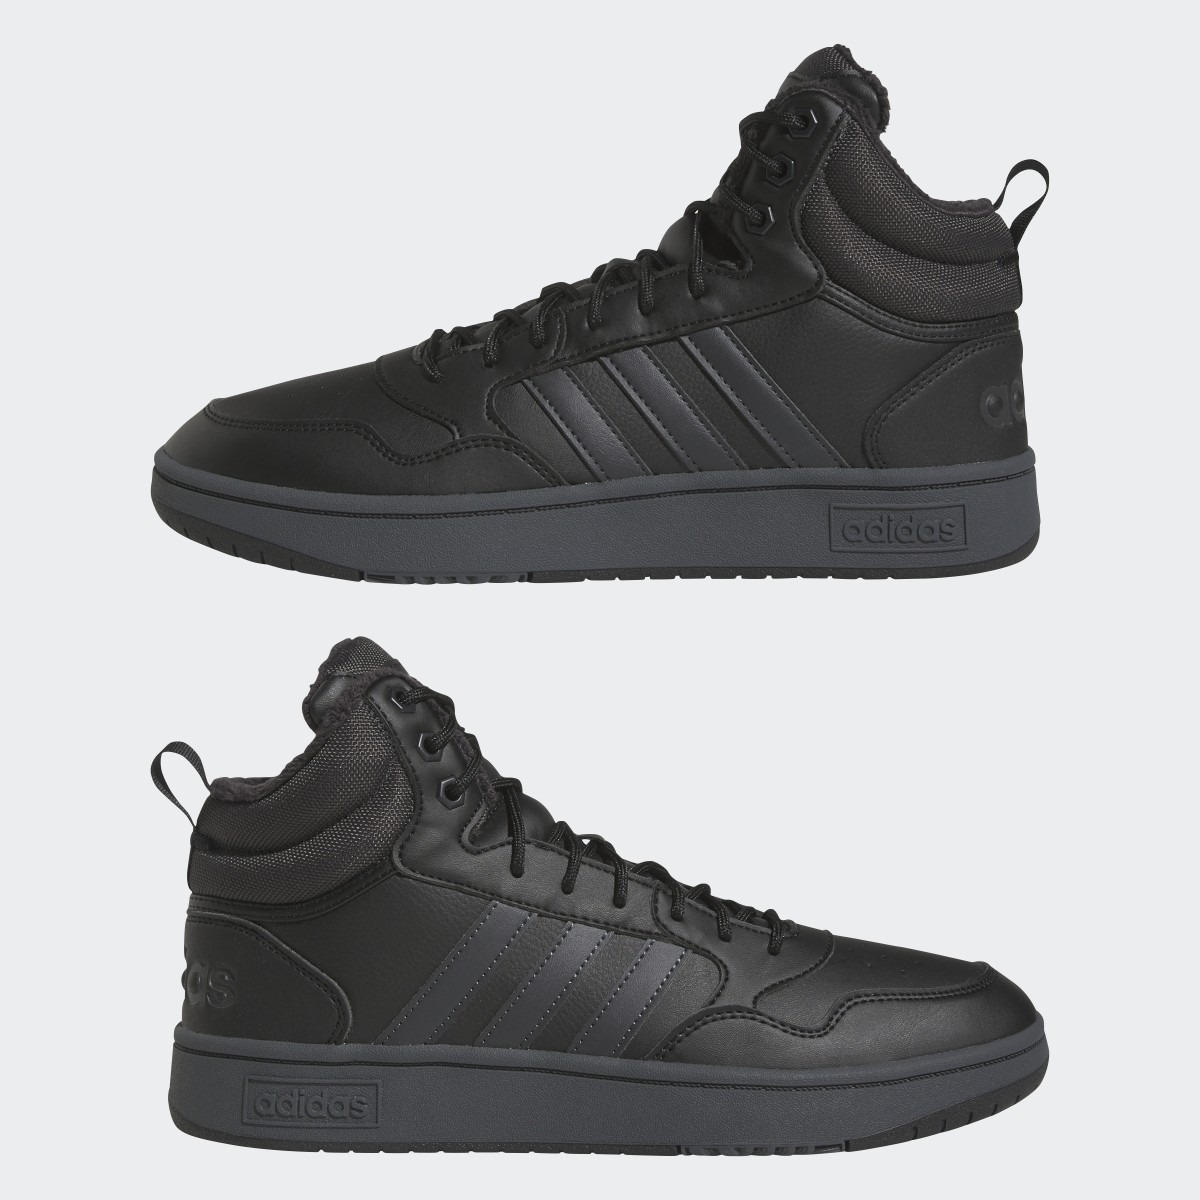 Adidas Hoops 3.0 Mid Lifestyle Basketball Classic Fur Lining Winterized Schuh. 8